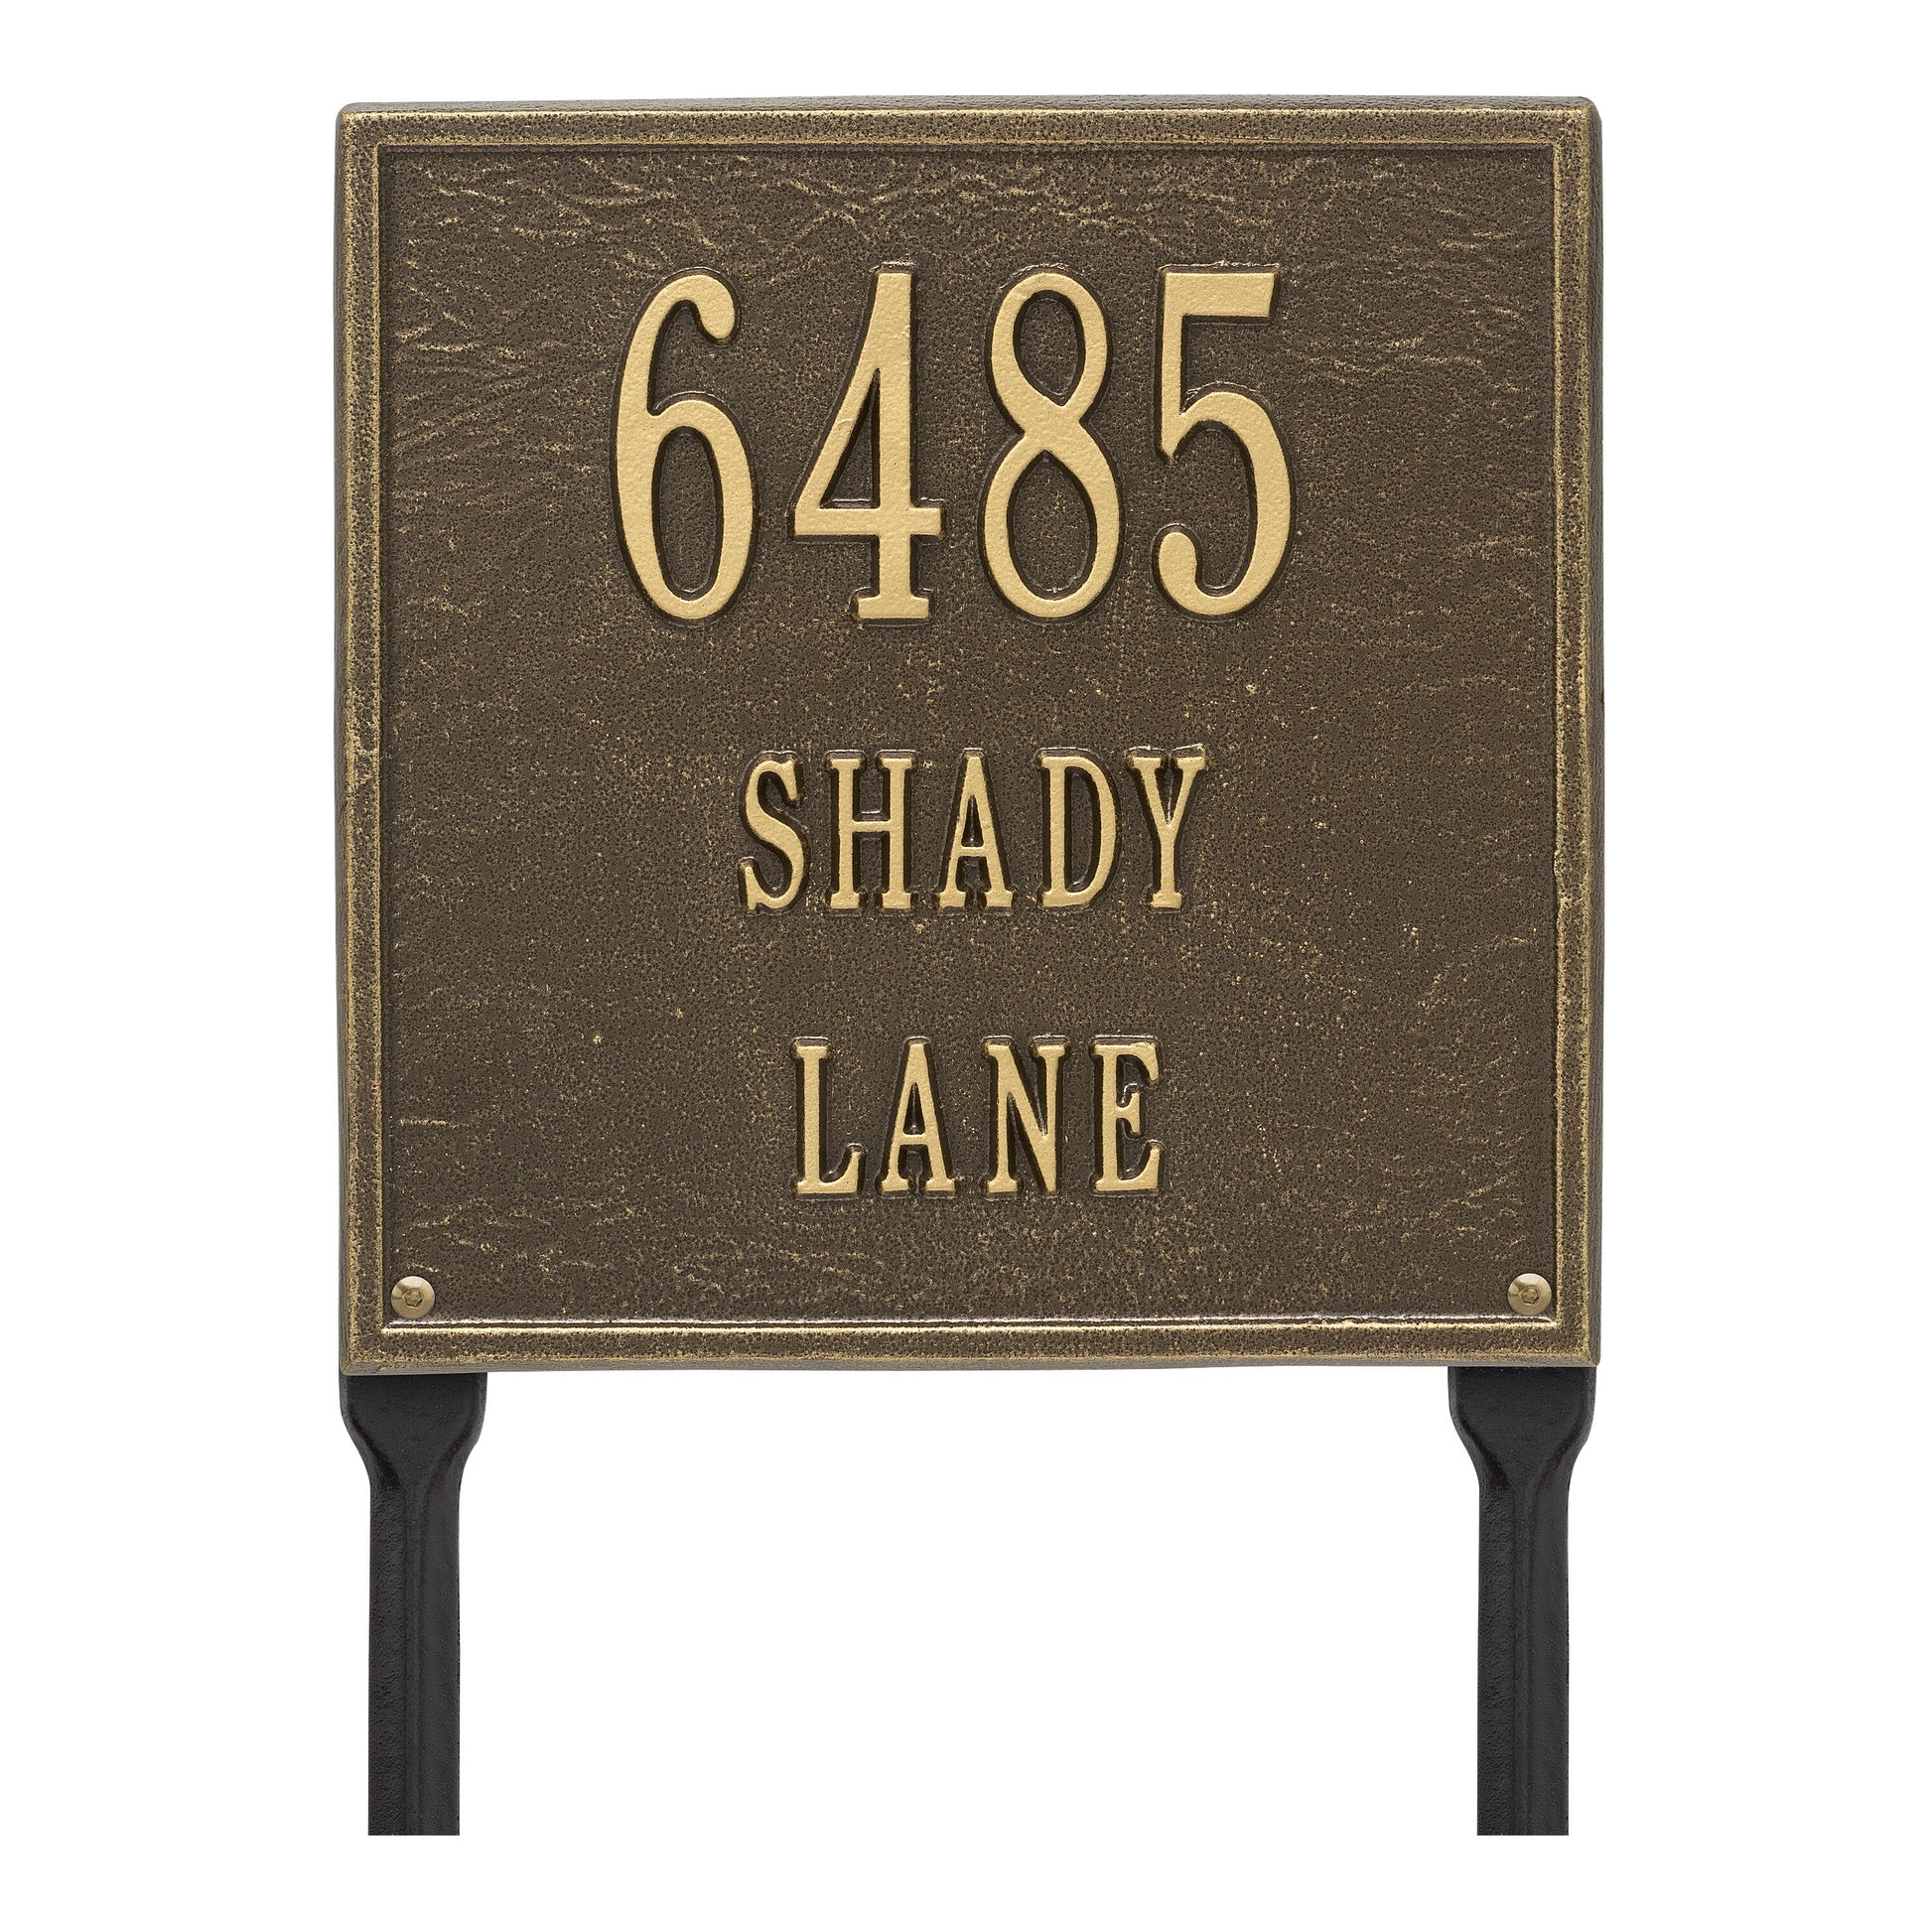 Whitehall Products Personalized Square Standard Lawn Plaque Three Line Antique Copper